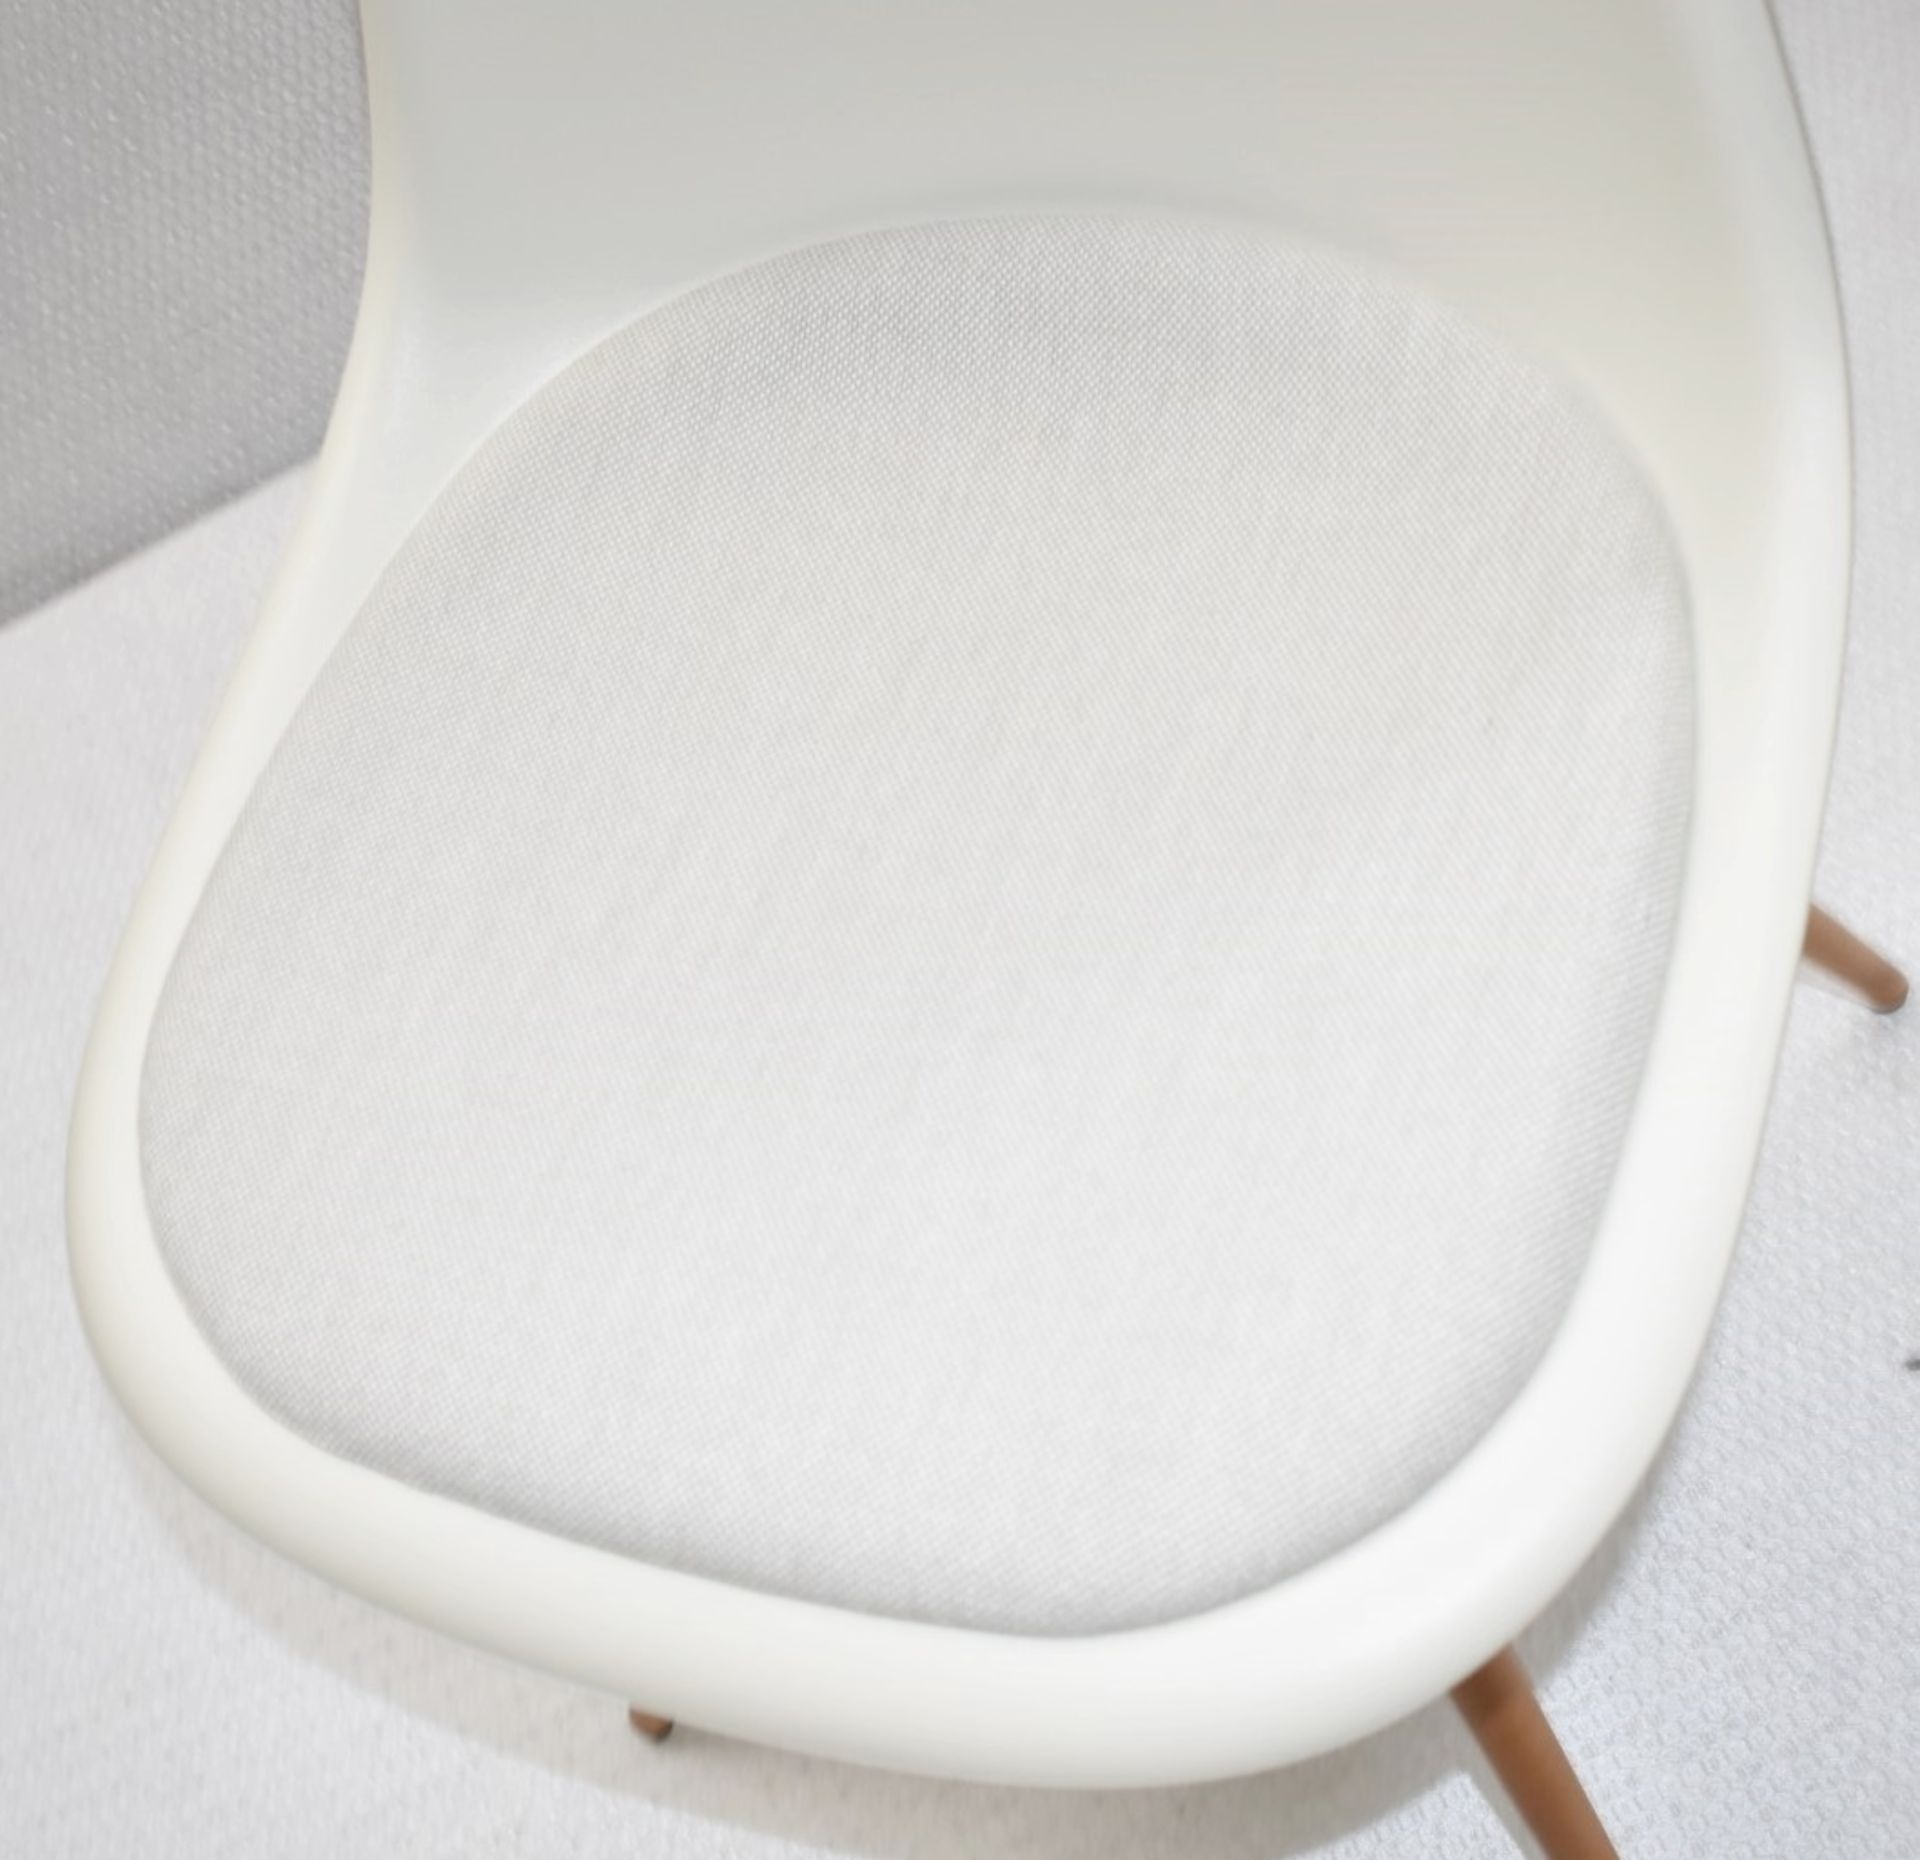 1 x VITRA Eames DSW Designer Plastic Chair With Upholstered Seat - Original RRP £660.00 - Image 4 of 8